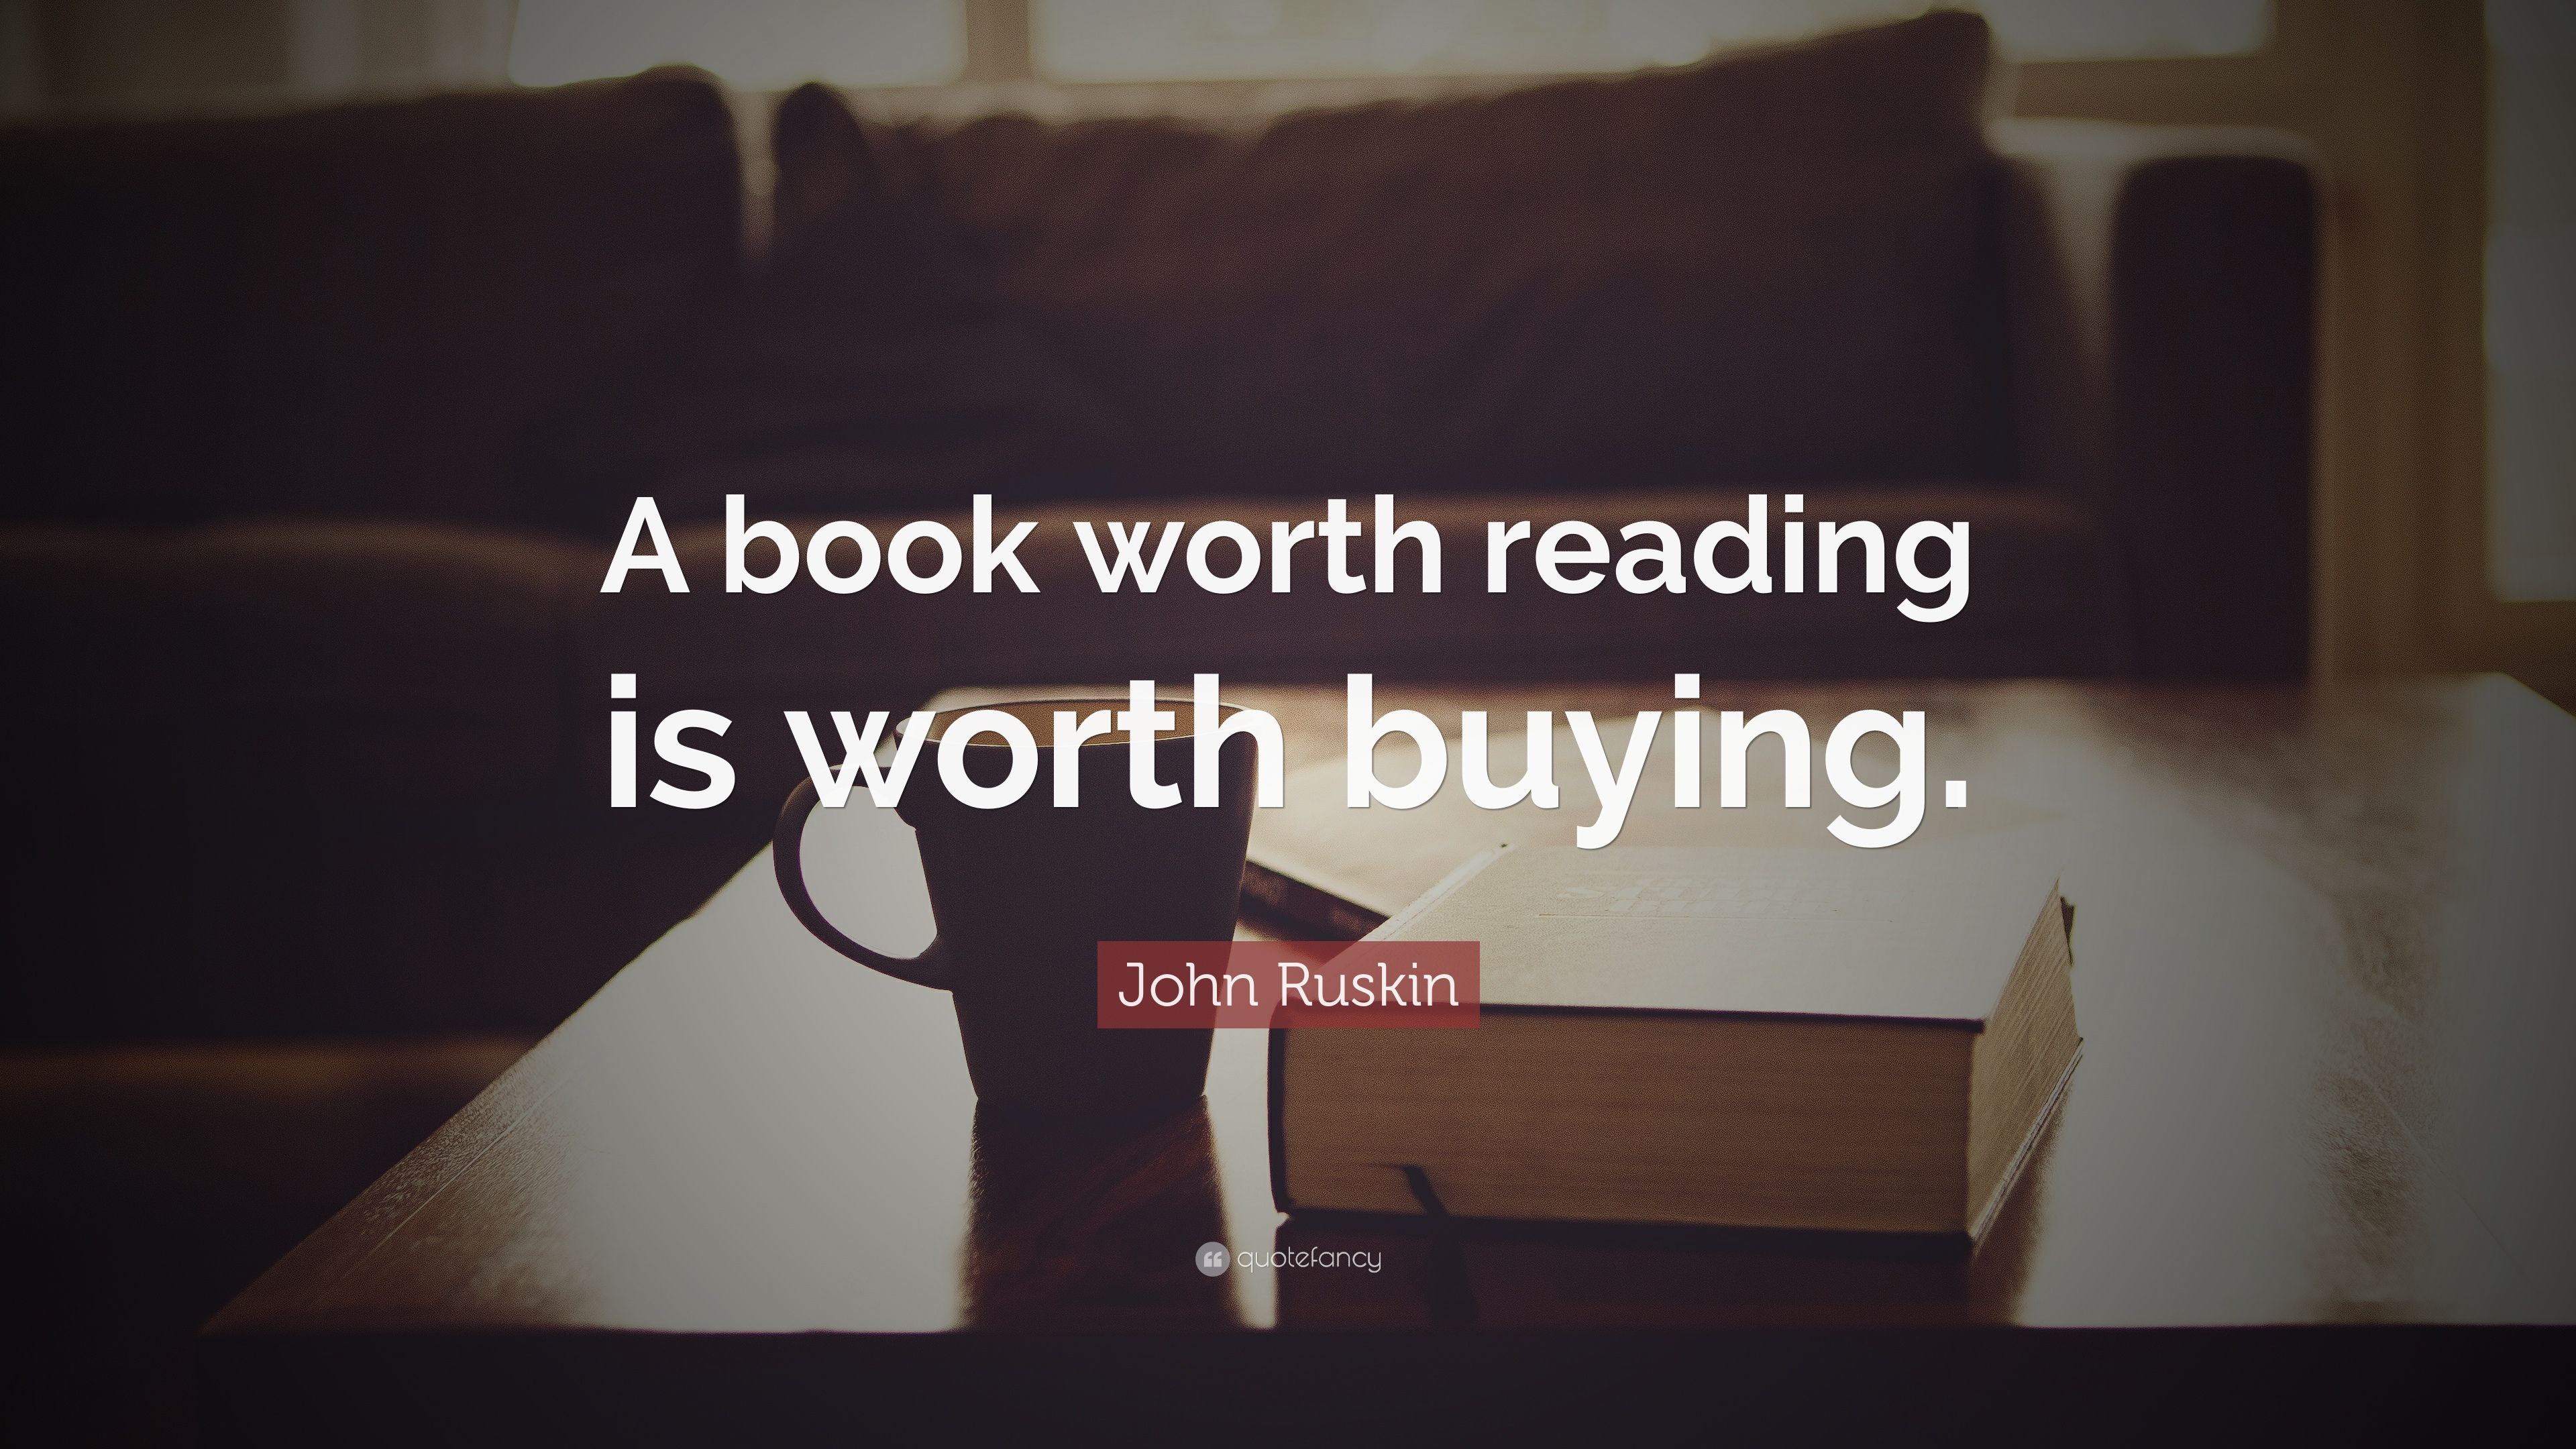 John Ruskin Quote: “A book worth reading is worth buying.” 12